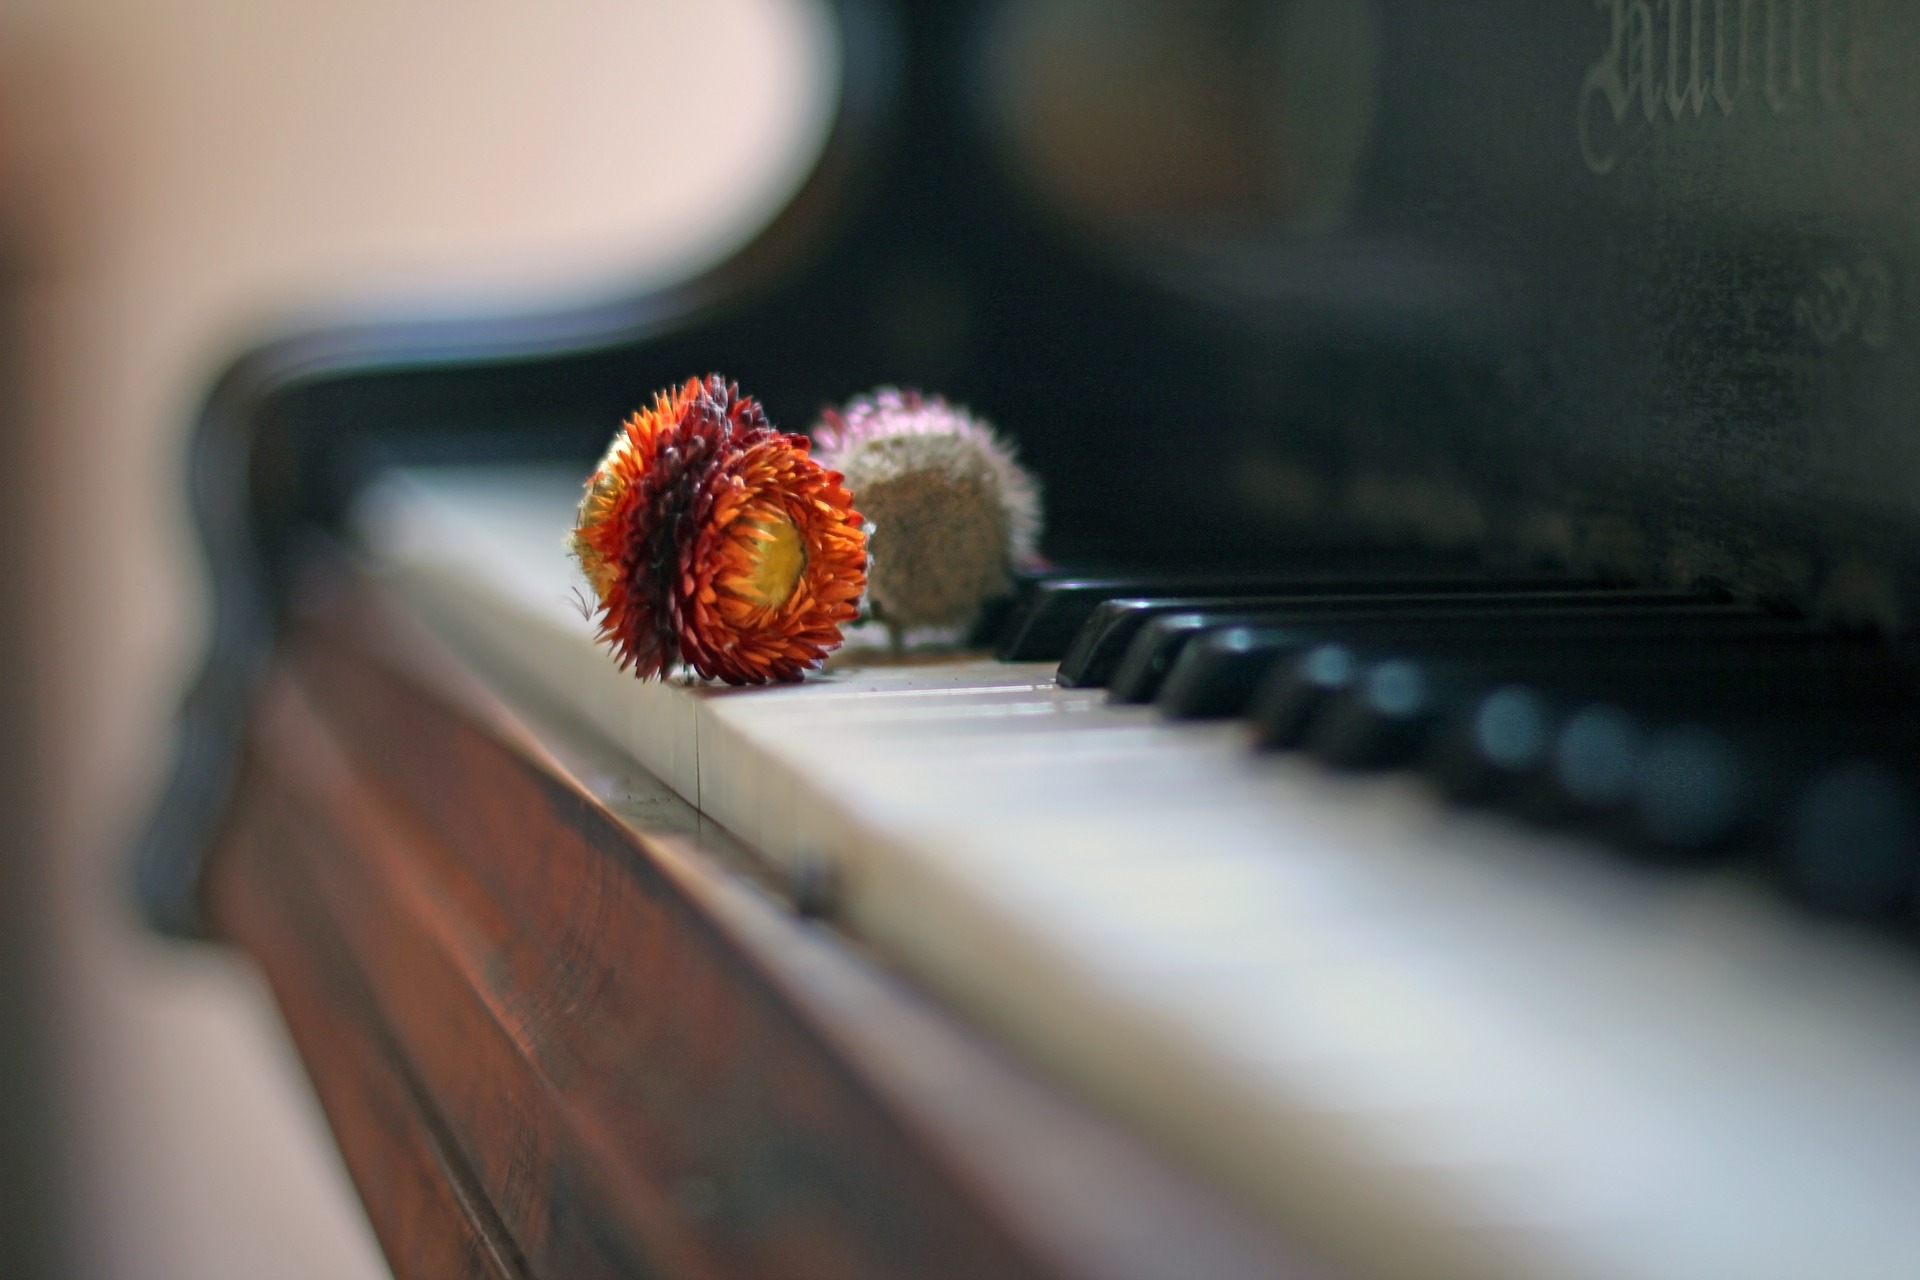 Several dried flowers rest on the keys of an antique piano.